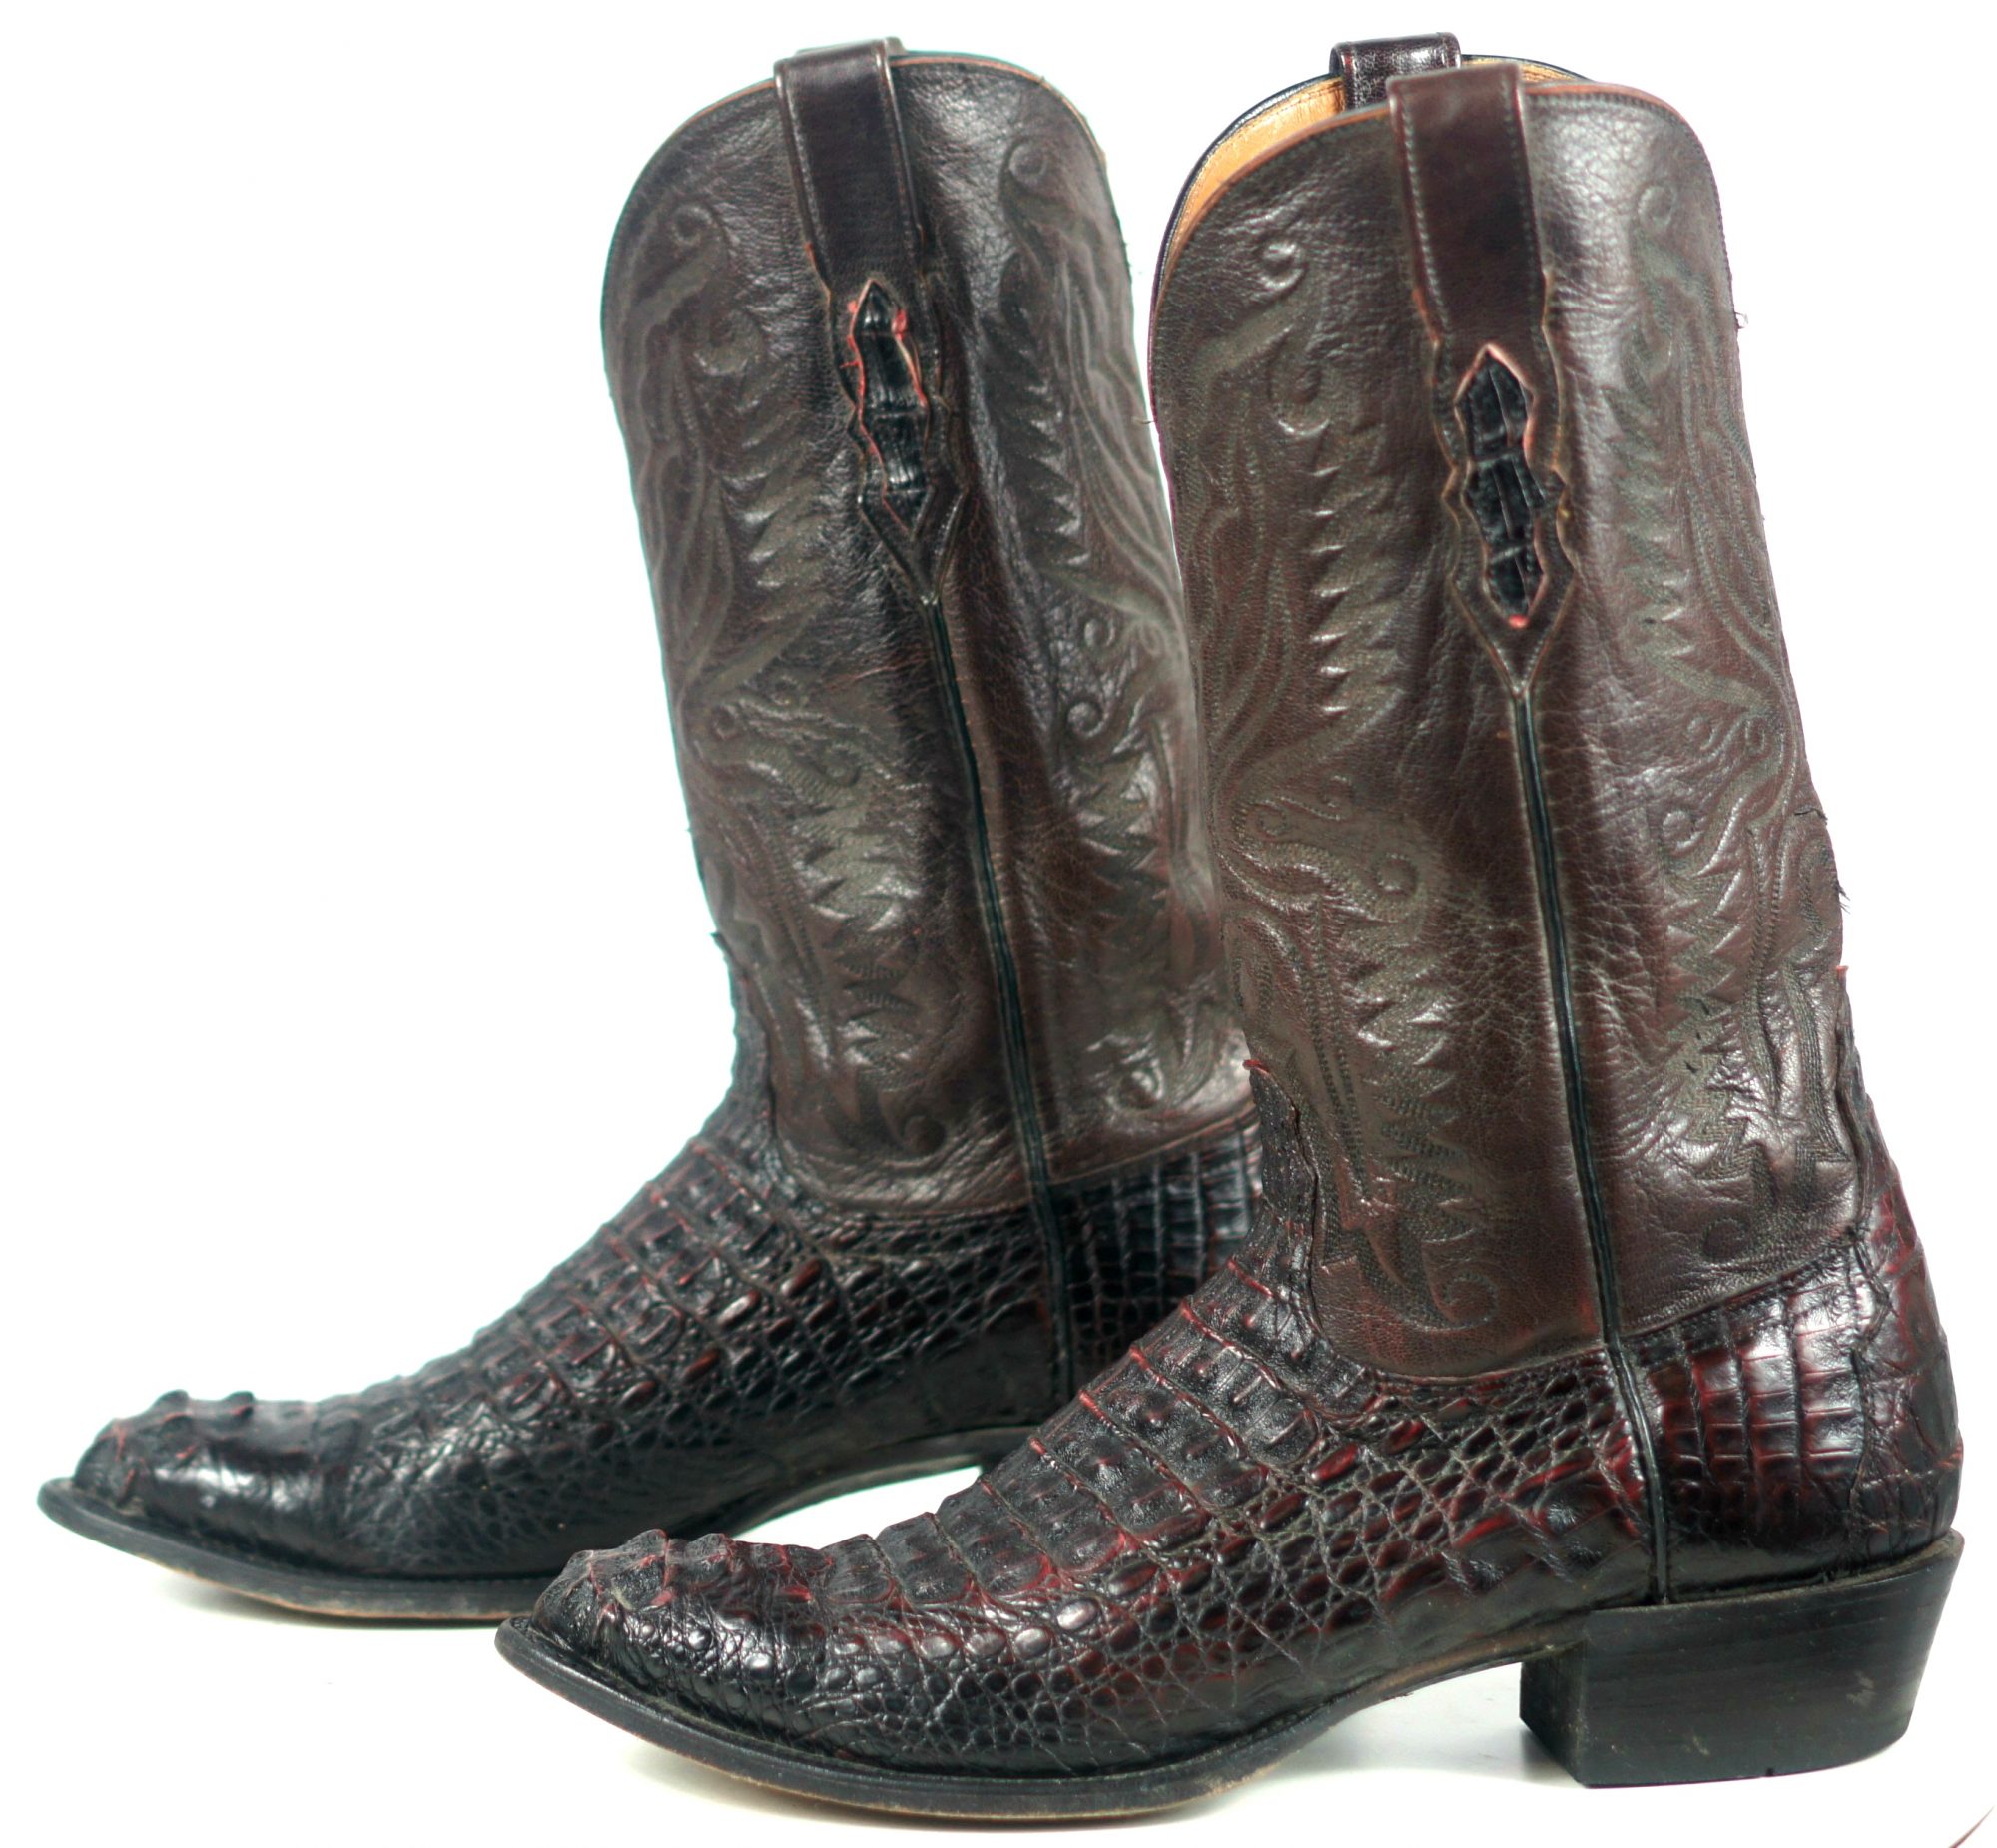 Lucchese 2000 Caiman Alligator Exotic Cowboy Western Boots Rock N Roll ...